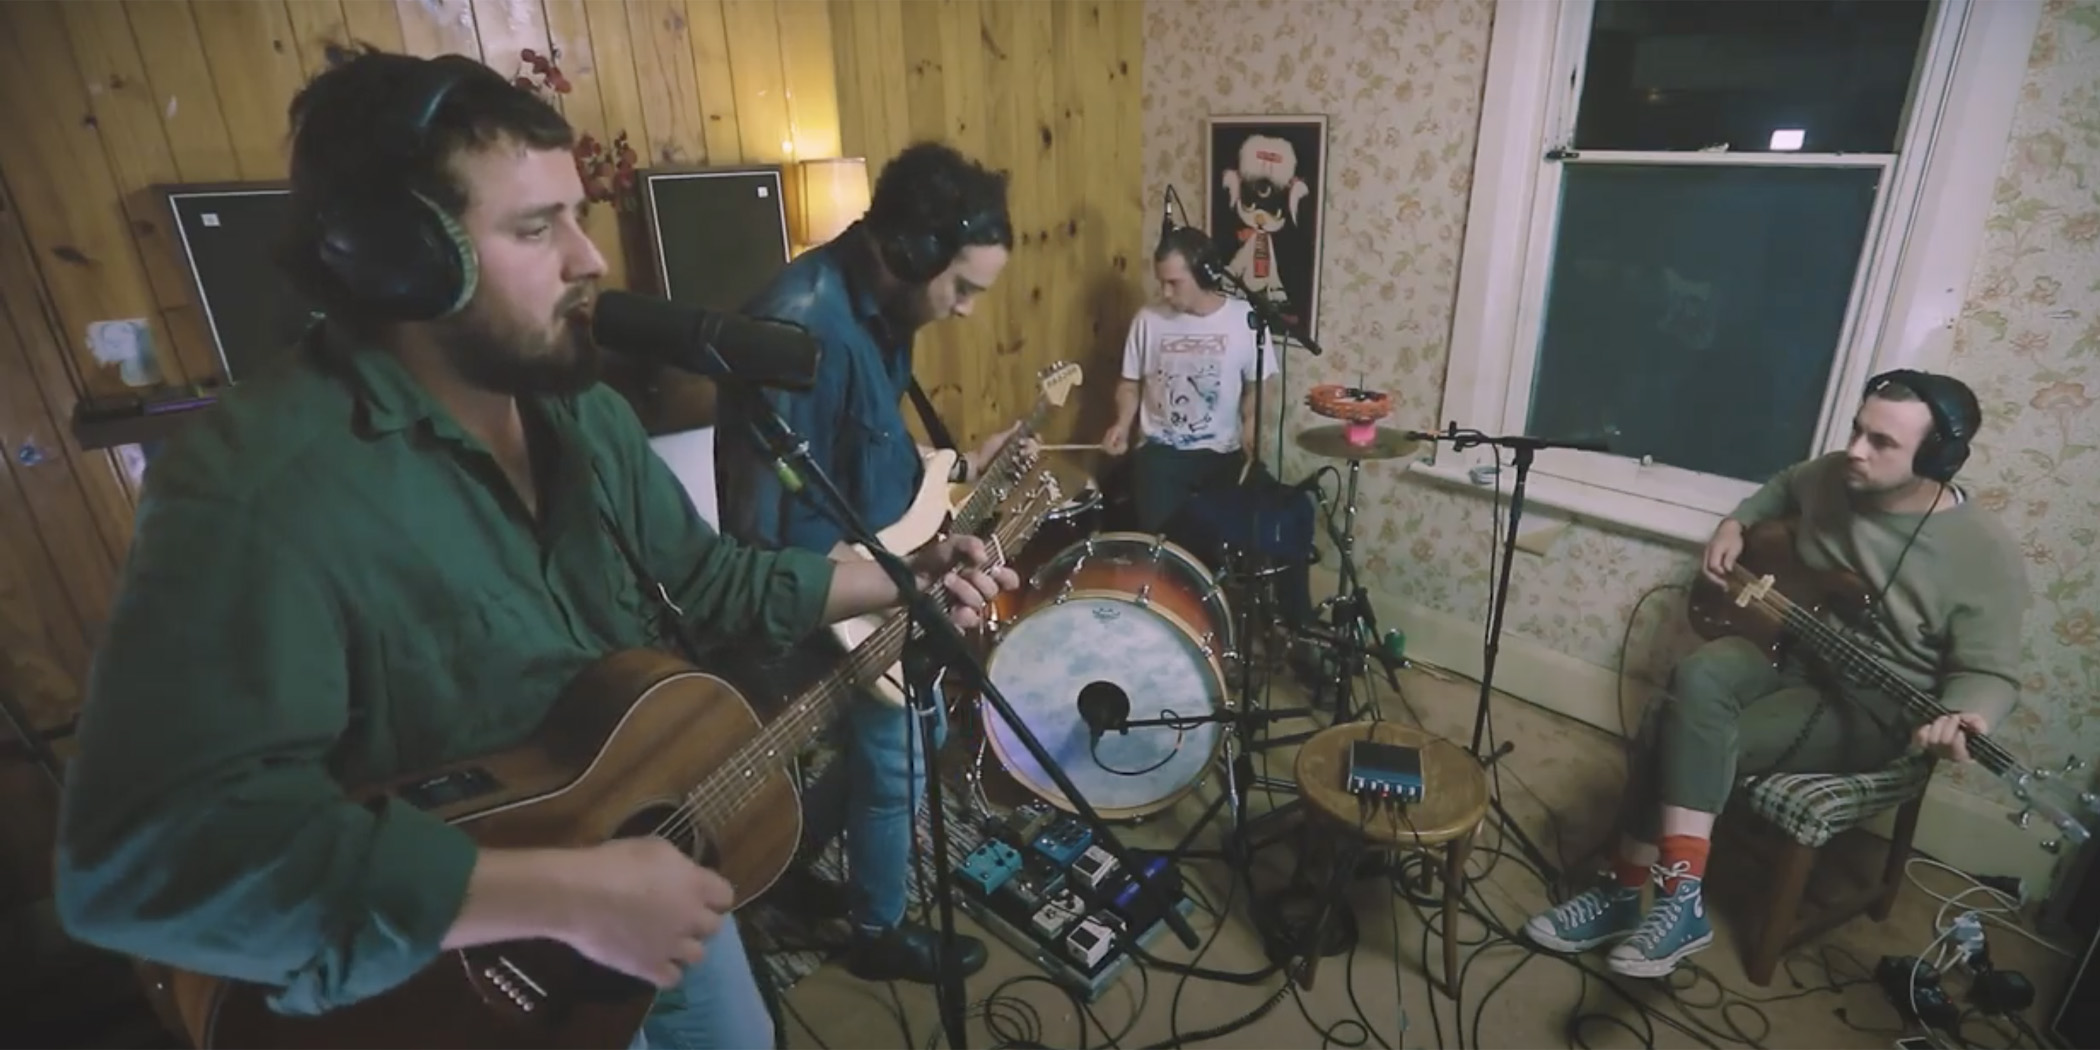 Image of Bad//Dreems performing for Rolling Stone's 'In My Room' series